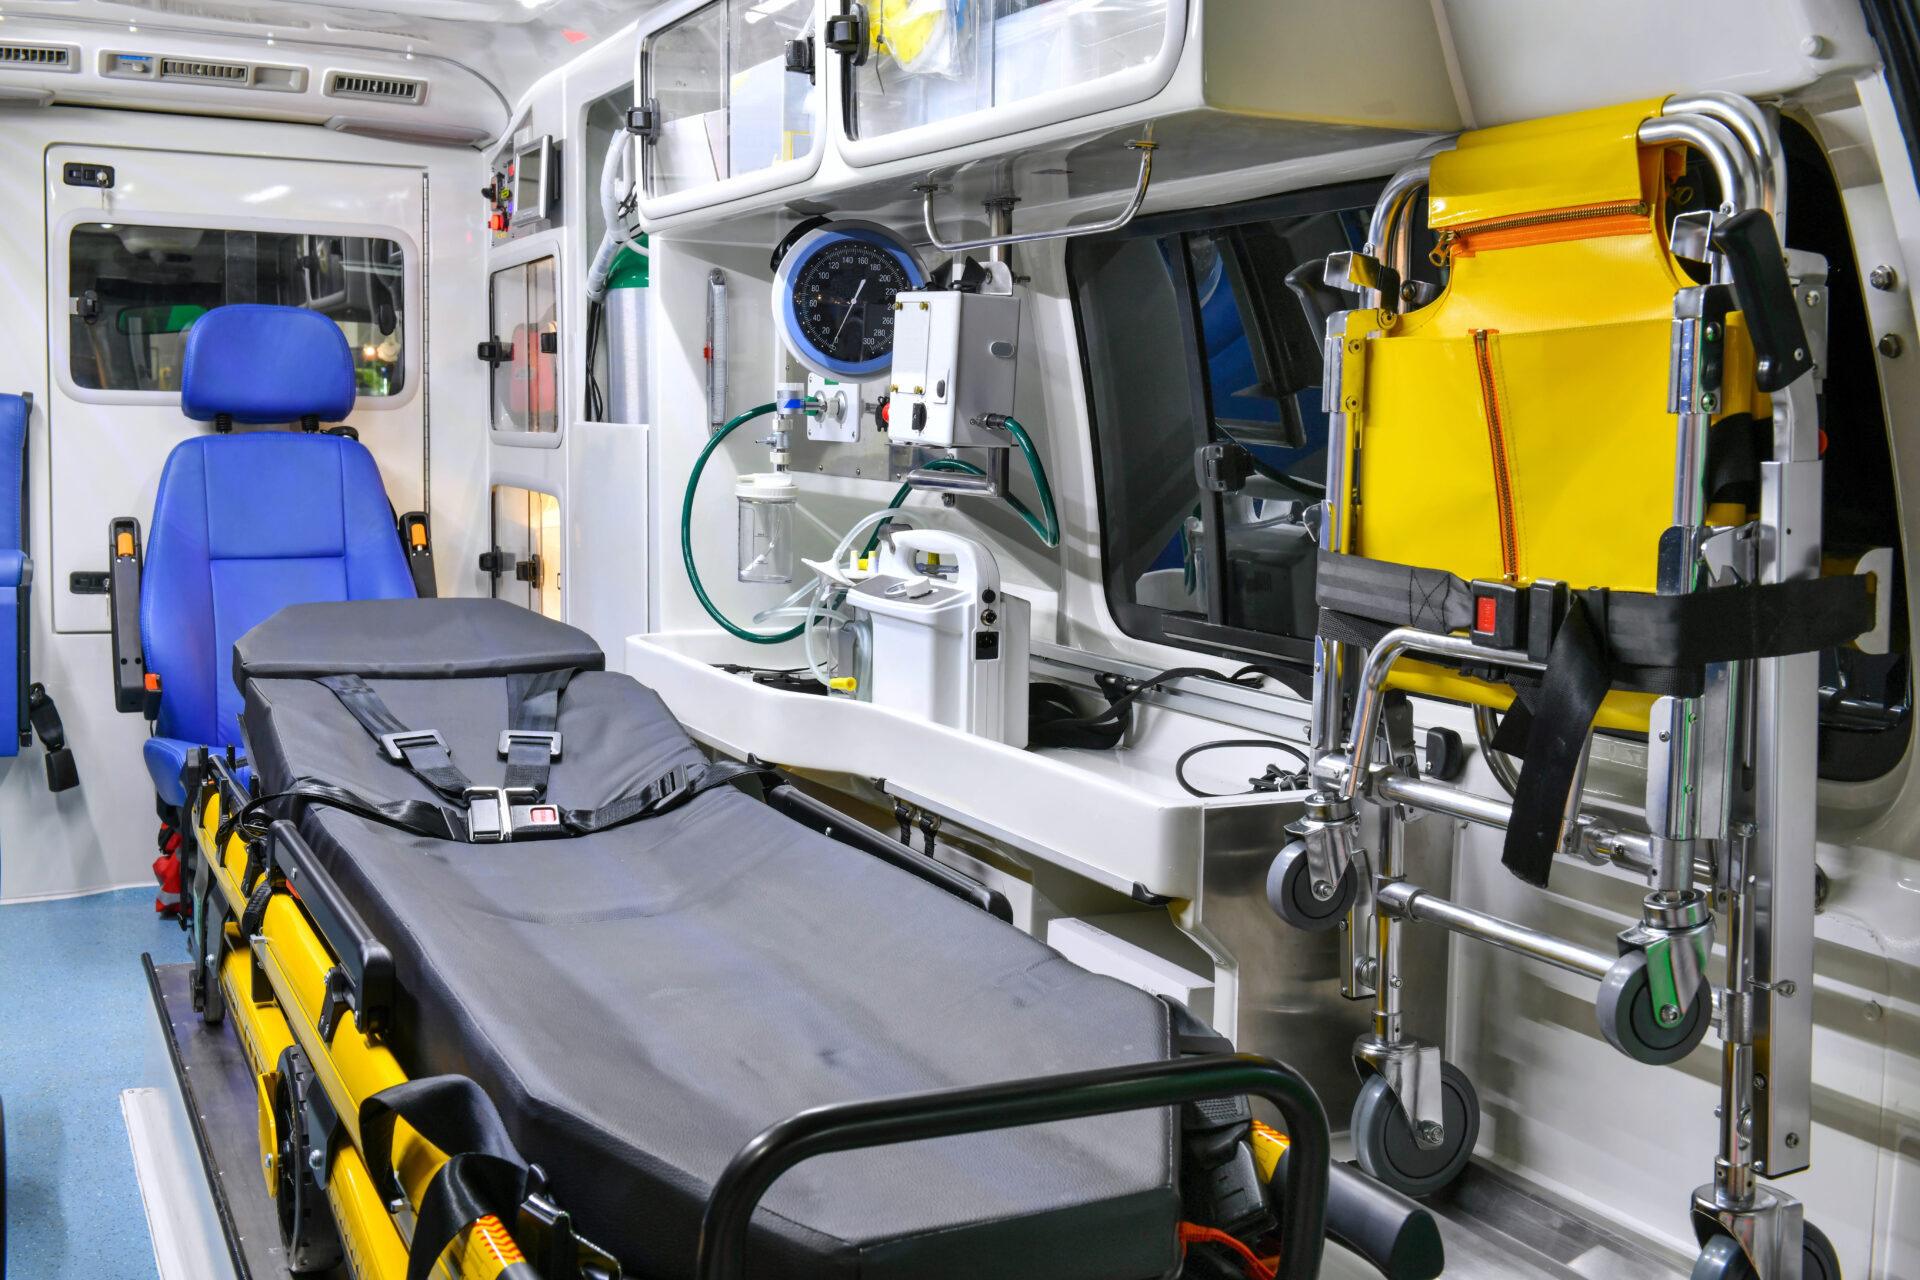 The interior of an ambulance is shown with a stretcher cleaned and a blue chair for a paramedic.